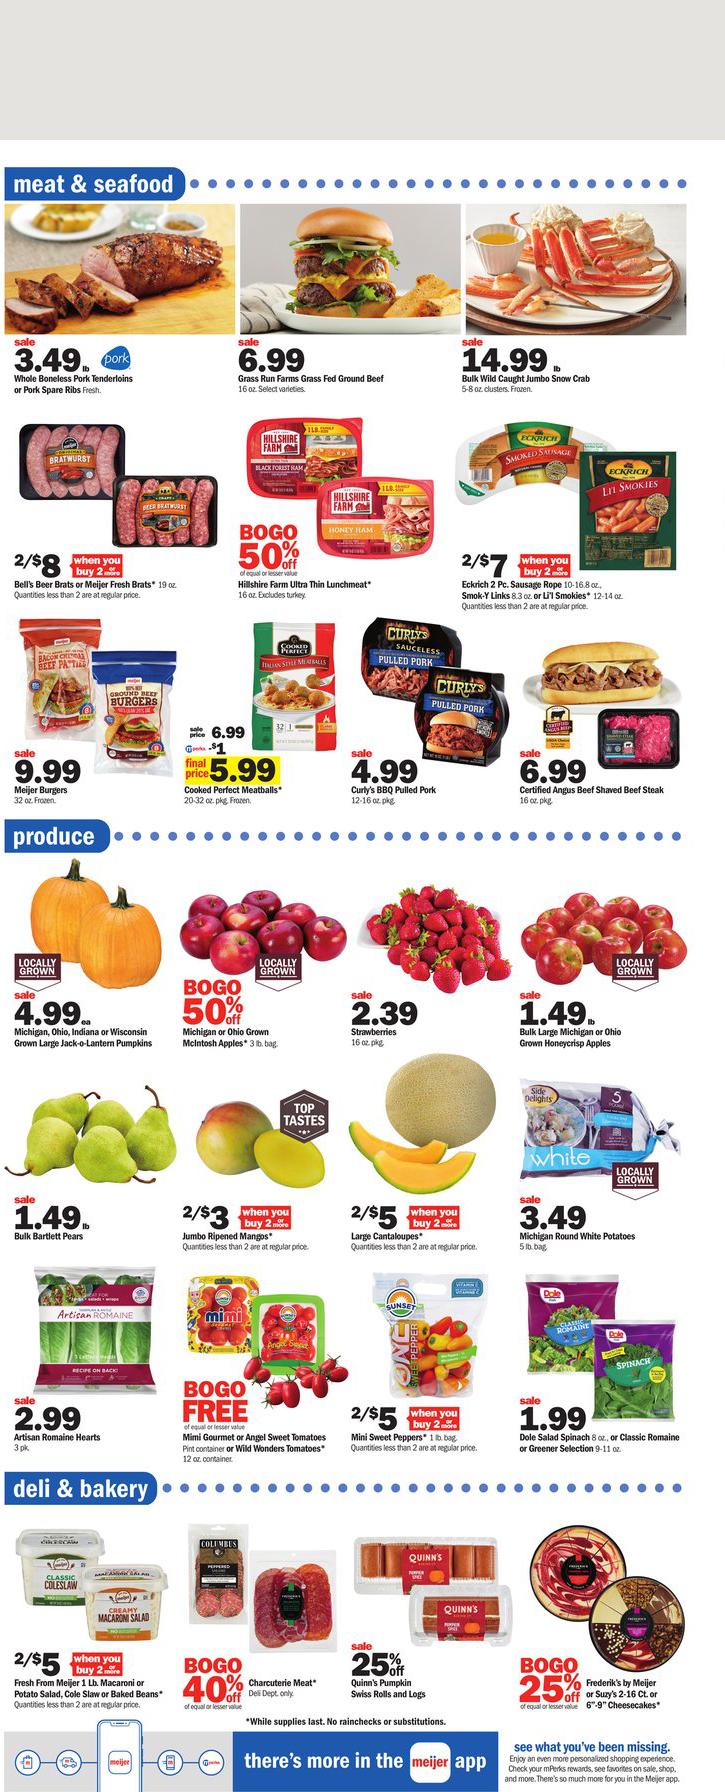 18.09.2022 Meijer ad 7. page